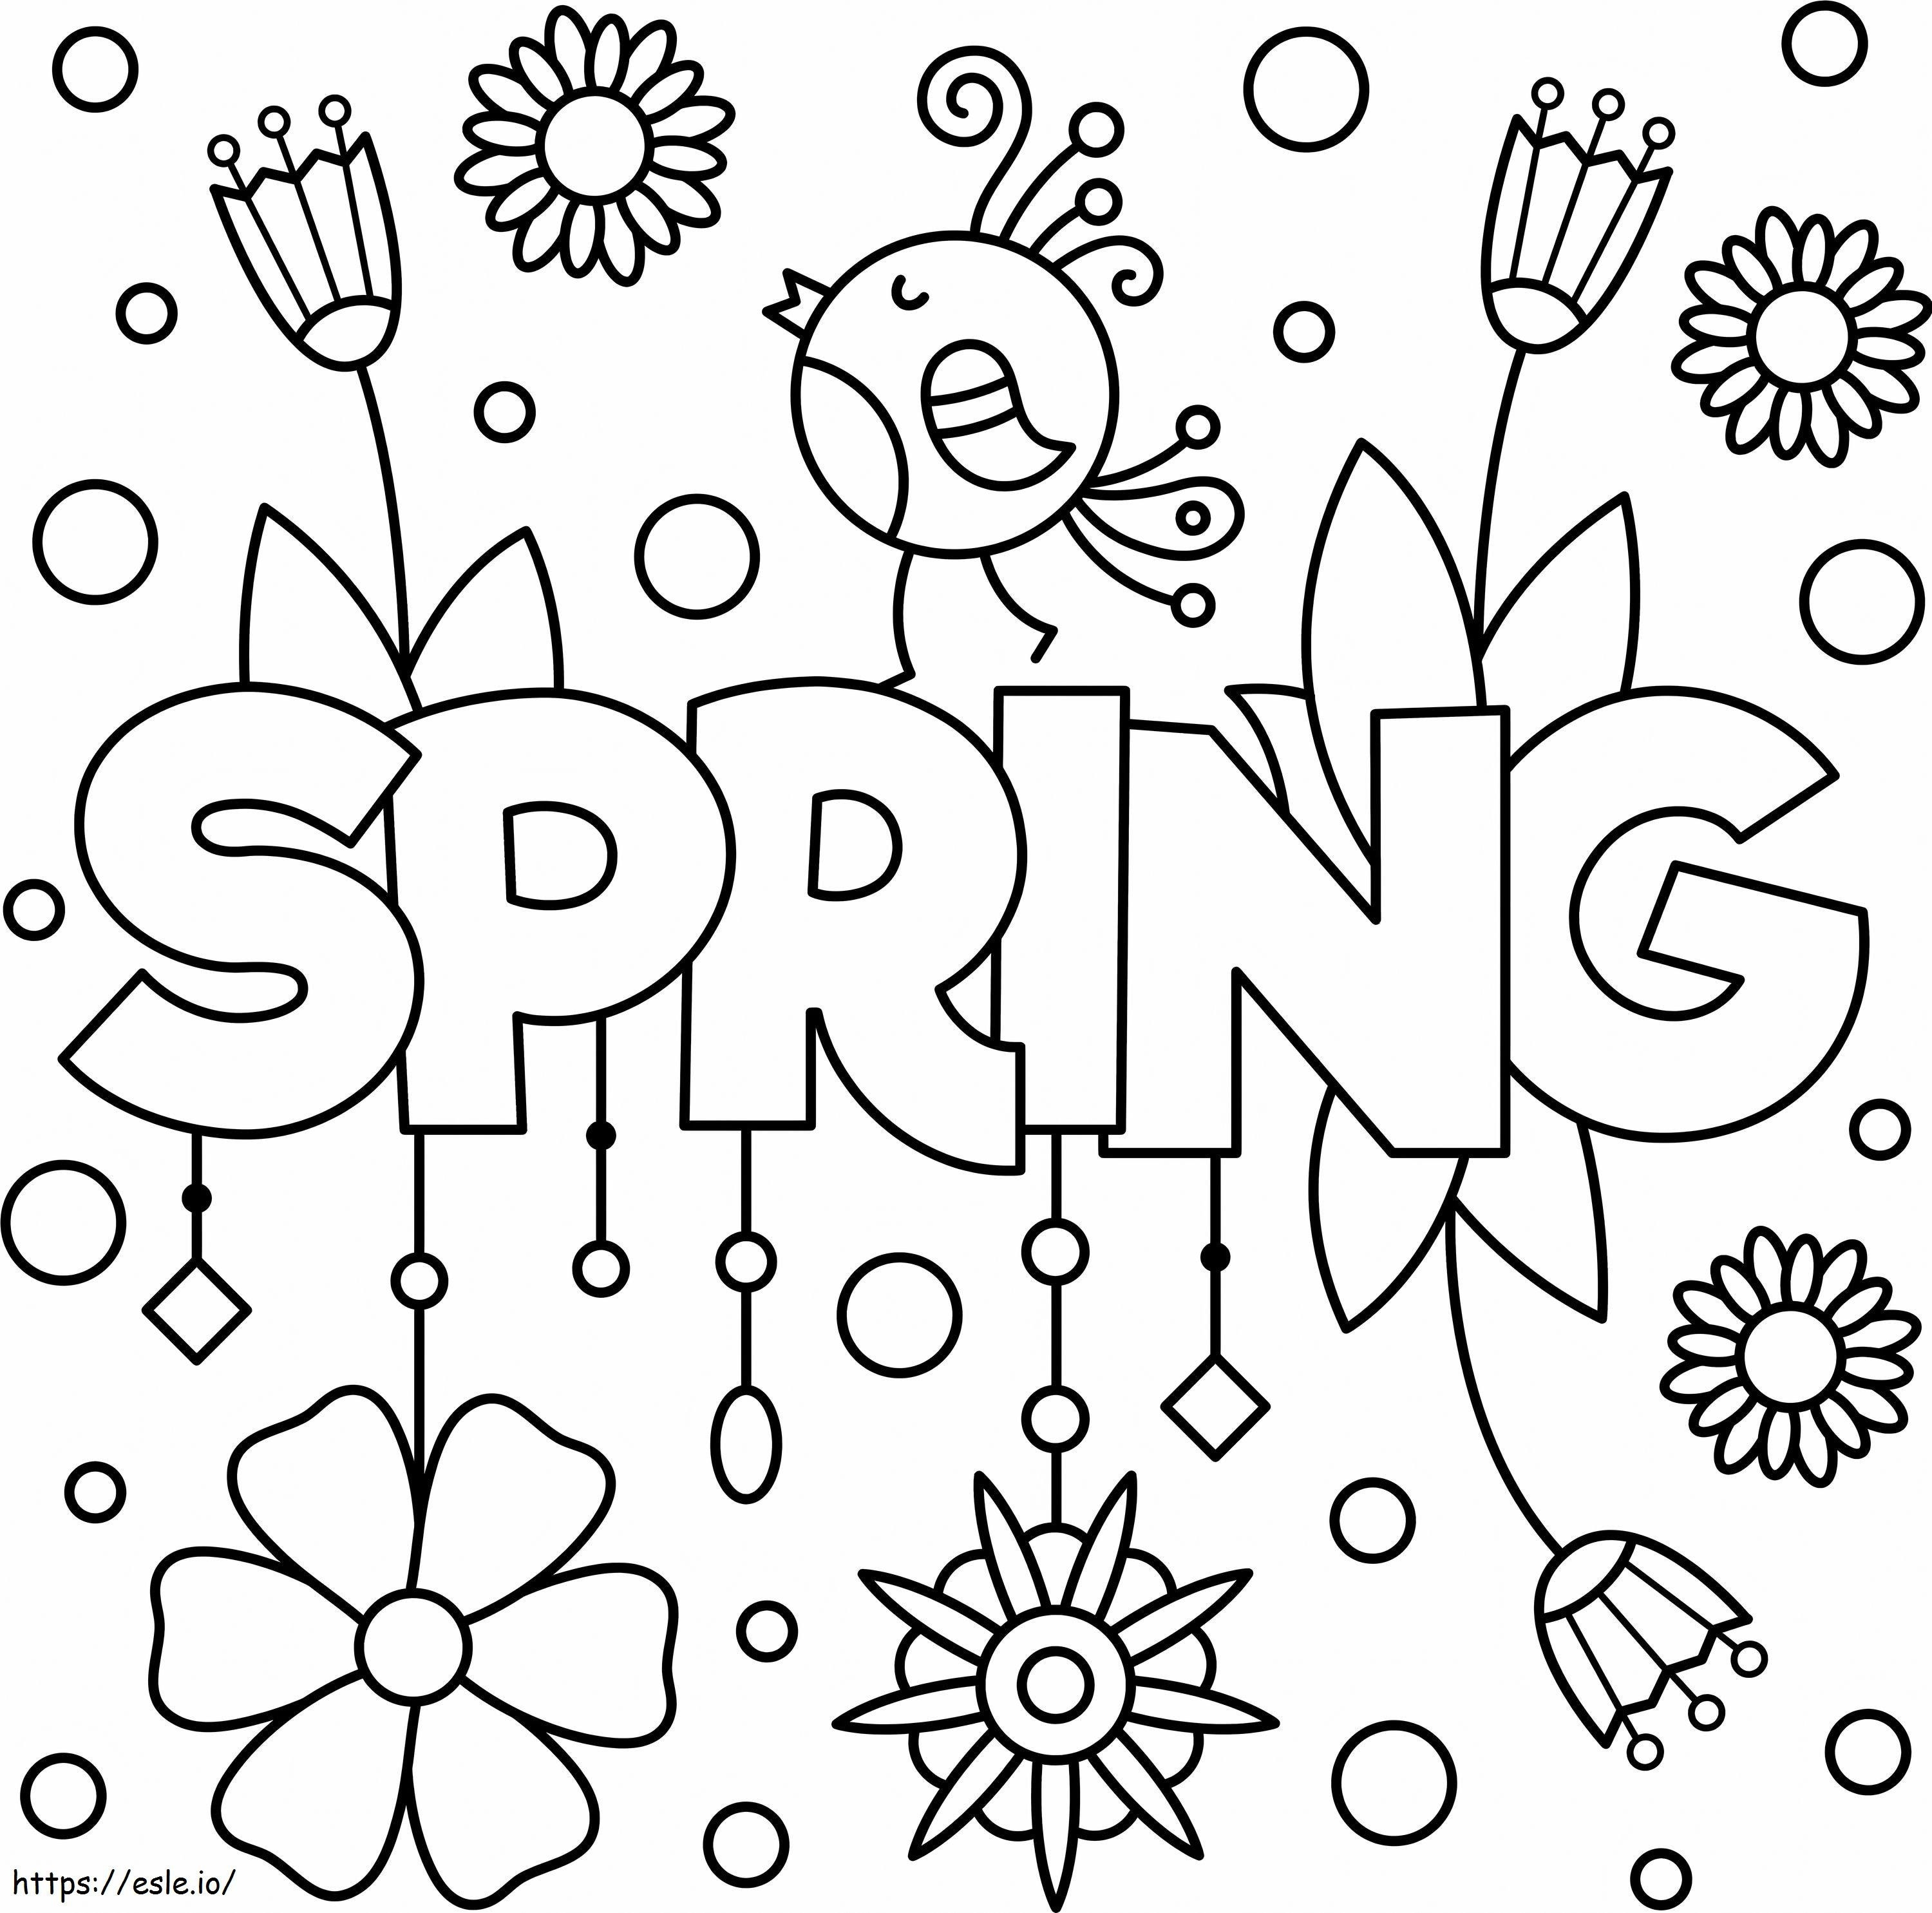 Incredible Spring coloring page